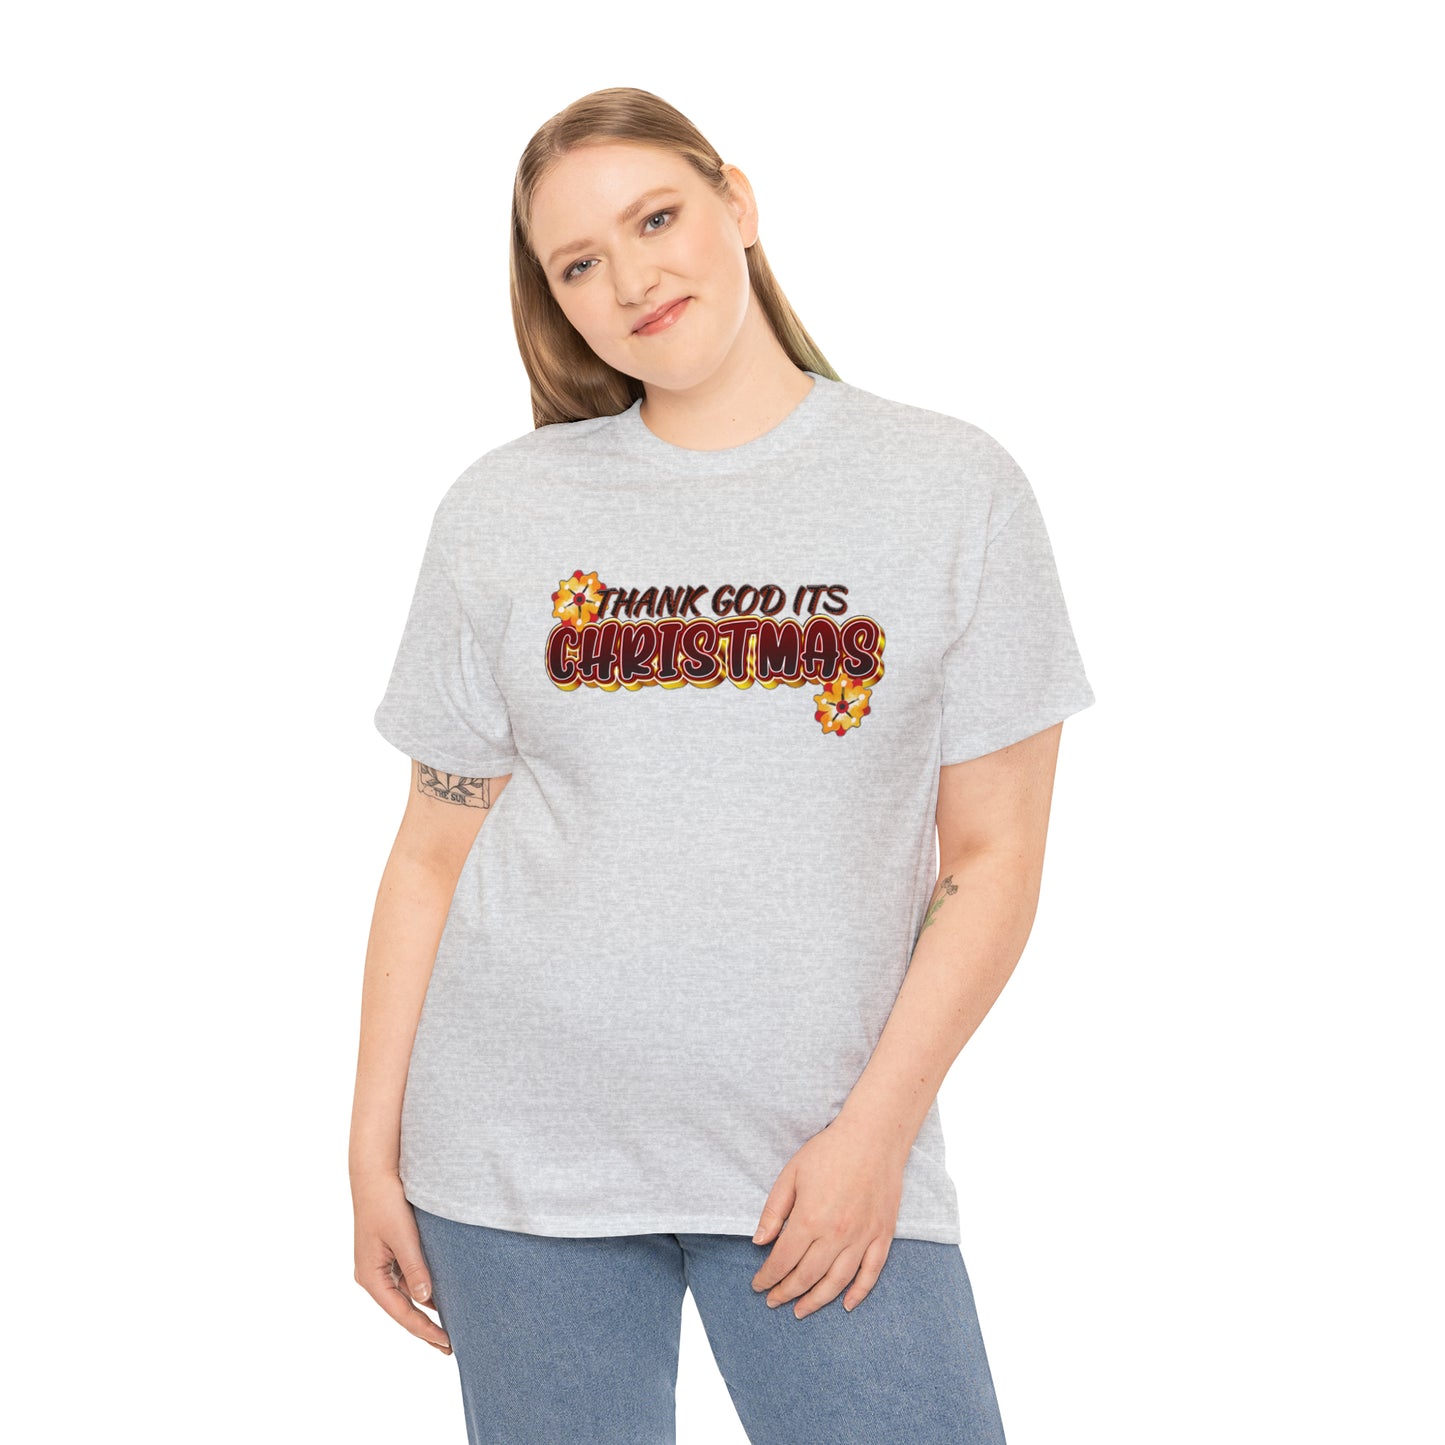 Thank God Its Christmas - Heavy Cotton Tee for Men and Women